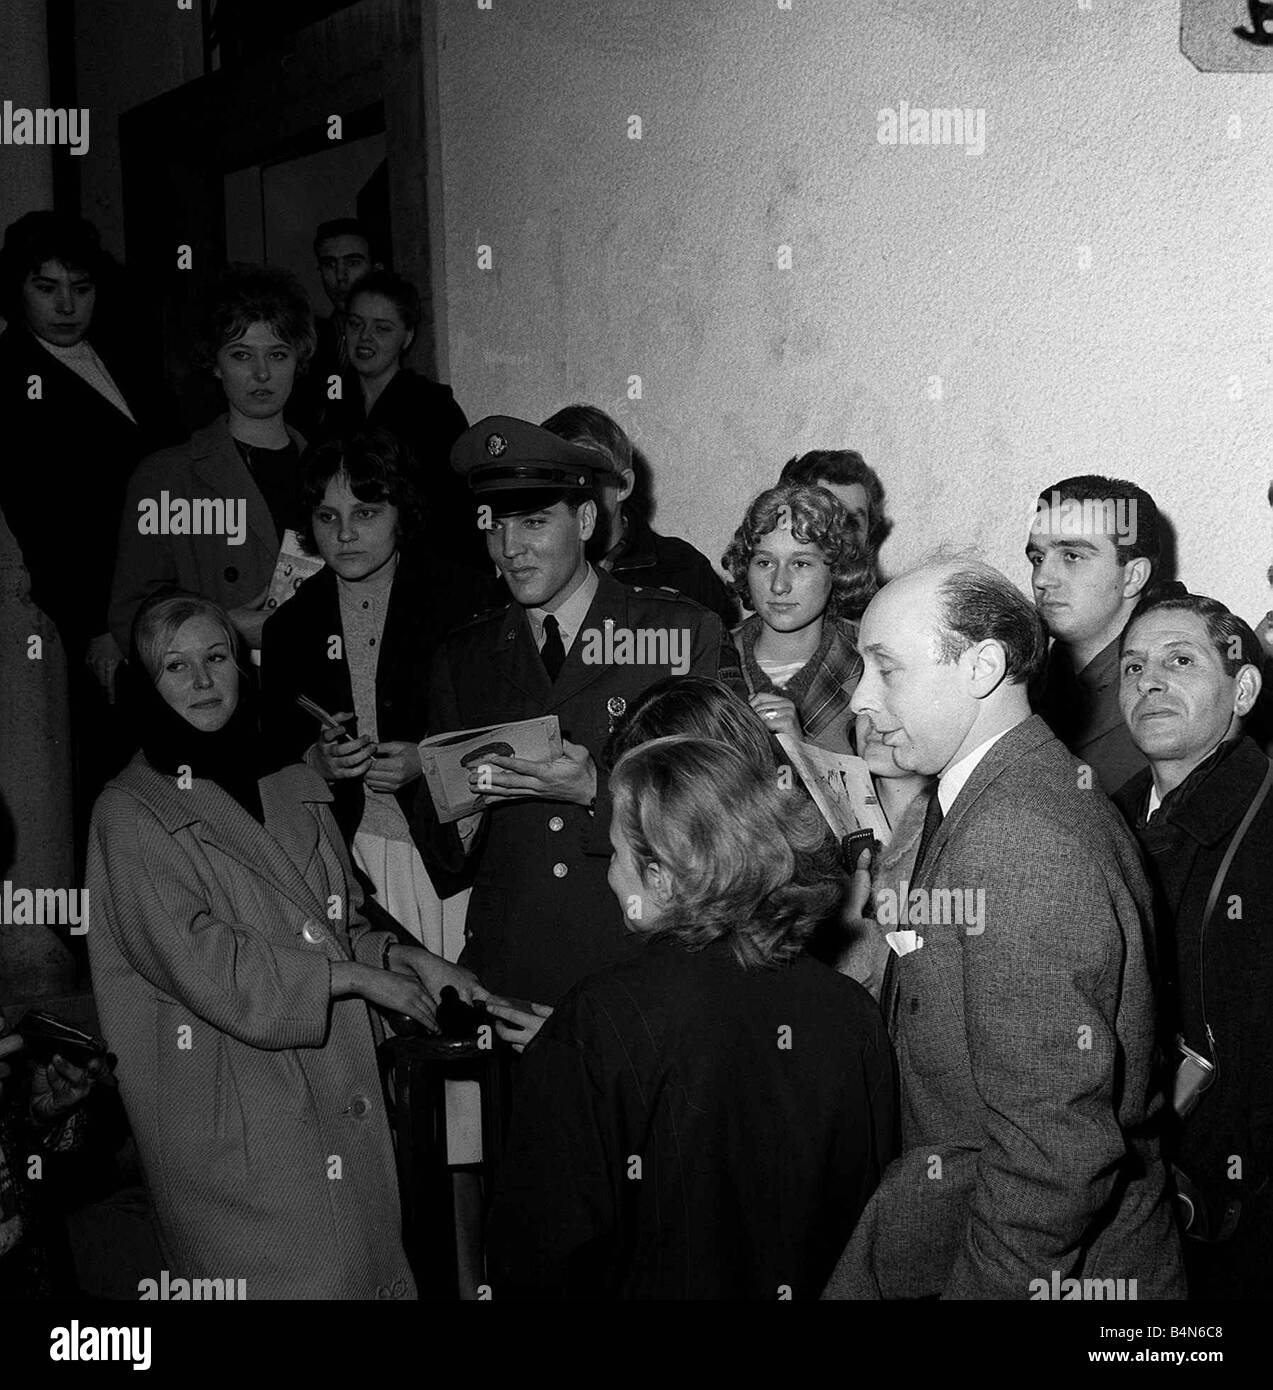 Elvis Presley with fans at press conference in Germany 1960 Donald Zec ...